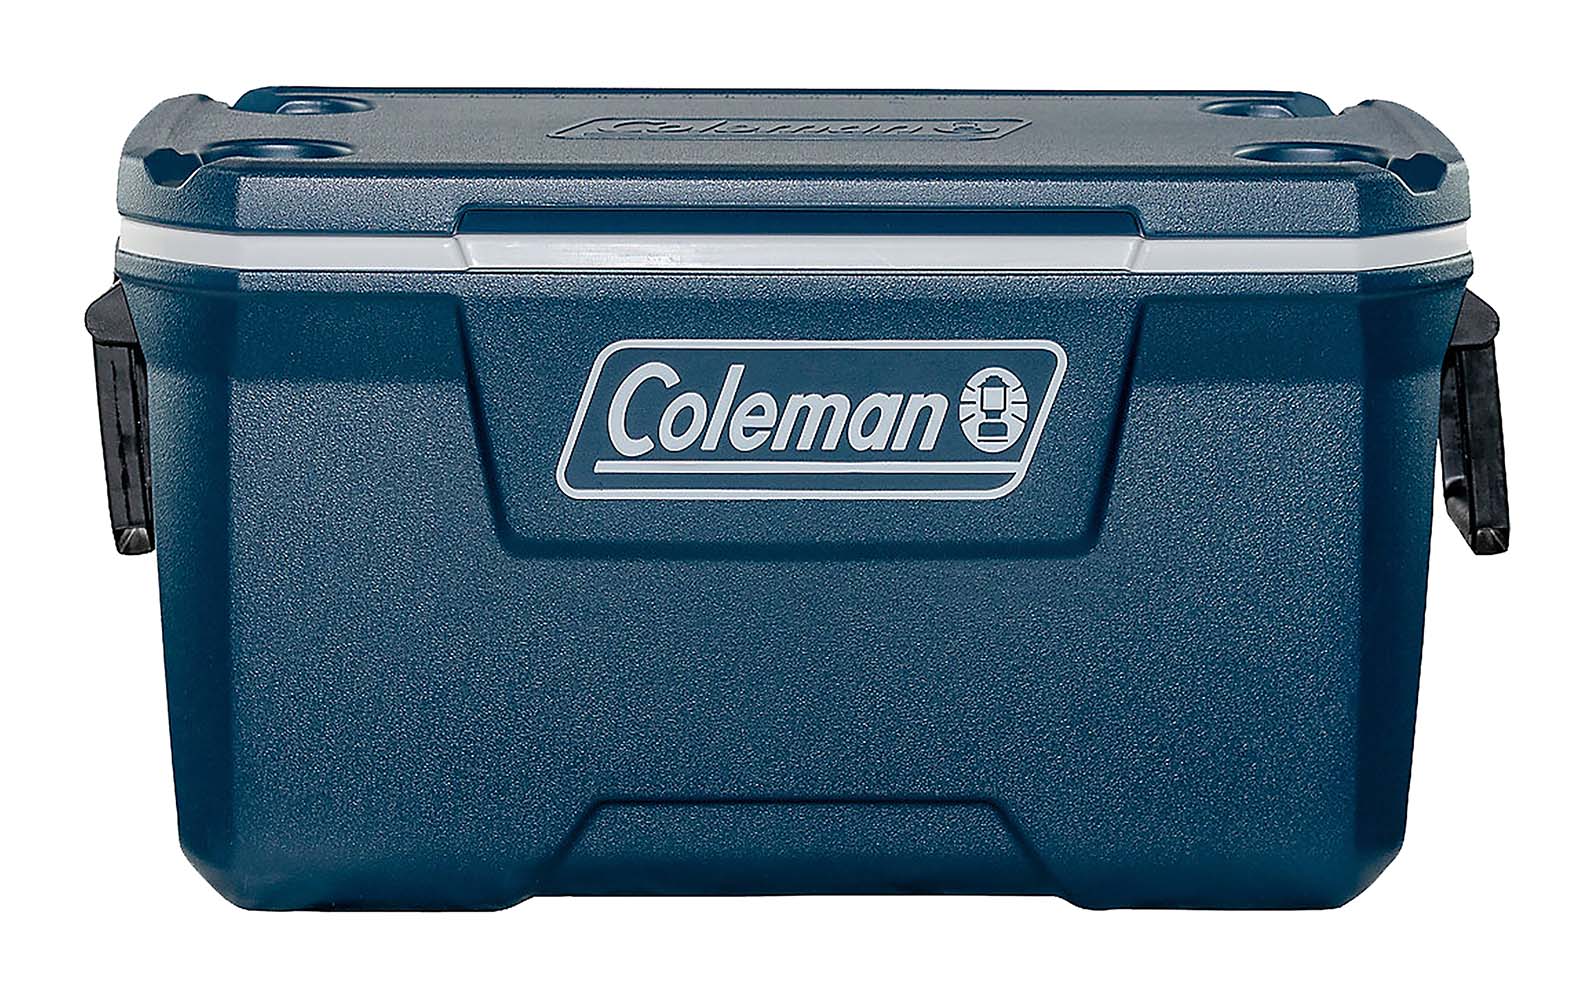 8937214 A simple high-quality knife sharpener. Equipped with foam insulation for a strong cooling performance, keeps cool for up to 5 days. Offers space for 6 x 1.5 litres bottles. The lid has four cup holders and the box has handles on the sides for easy lifting and carrying.The Coleman 70 QT Xtreme Cooler can be used for a variety of occasions. Think of a barbecue, a beach outing, while working or while camping. This cooler is one of the latest Xtreme collection. This box is designed to keep extra large quantities of drinks and food cold. Ideal for when you go camping with friends or family, for example.